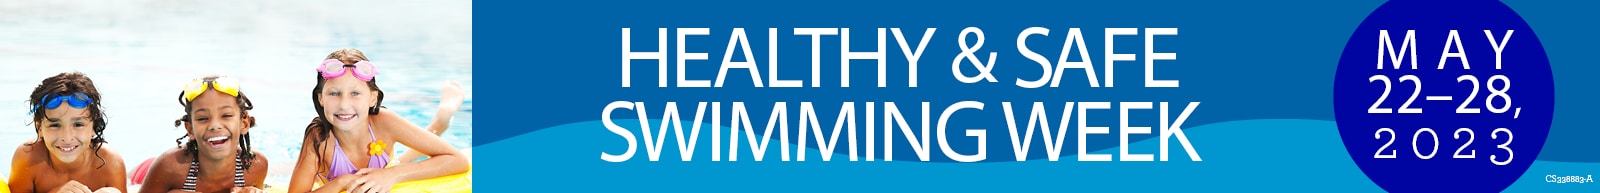 Healthy and Safe Swimming Week is May 22 through 28, 2023. PHoto contains 3 children playing in a pool.